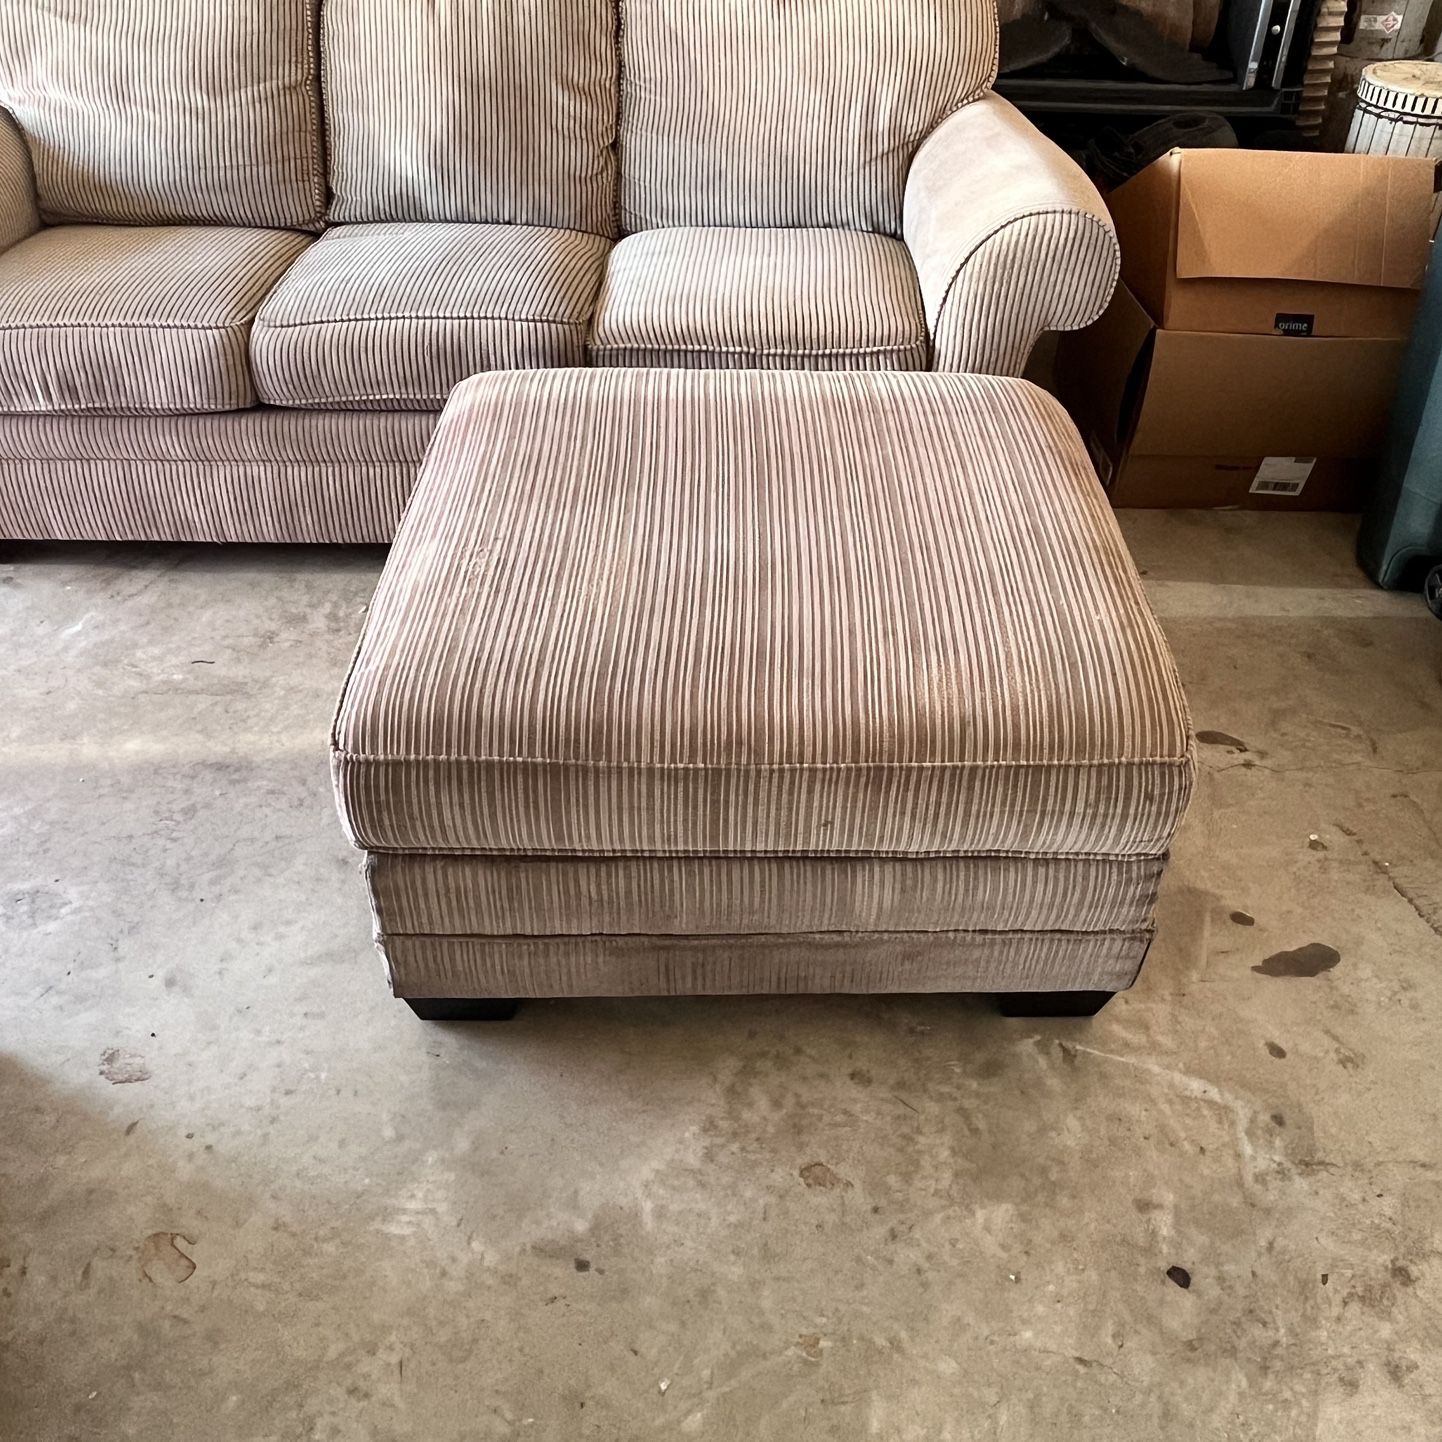 COUCH WITH OTTOMAN